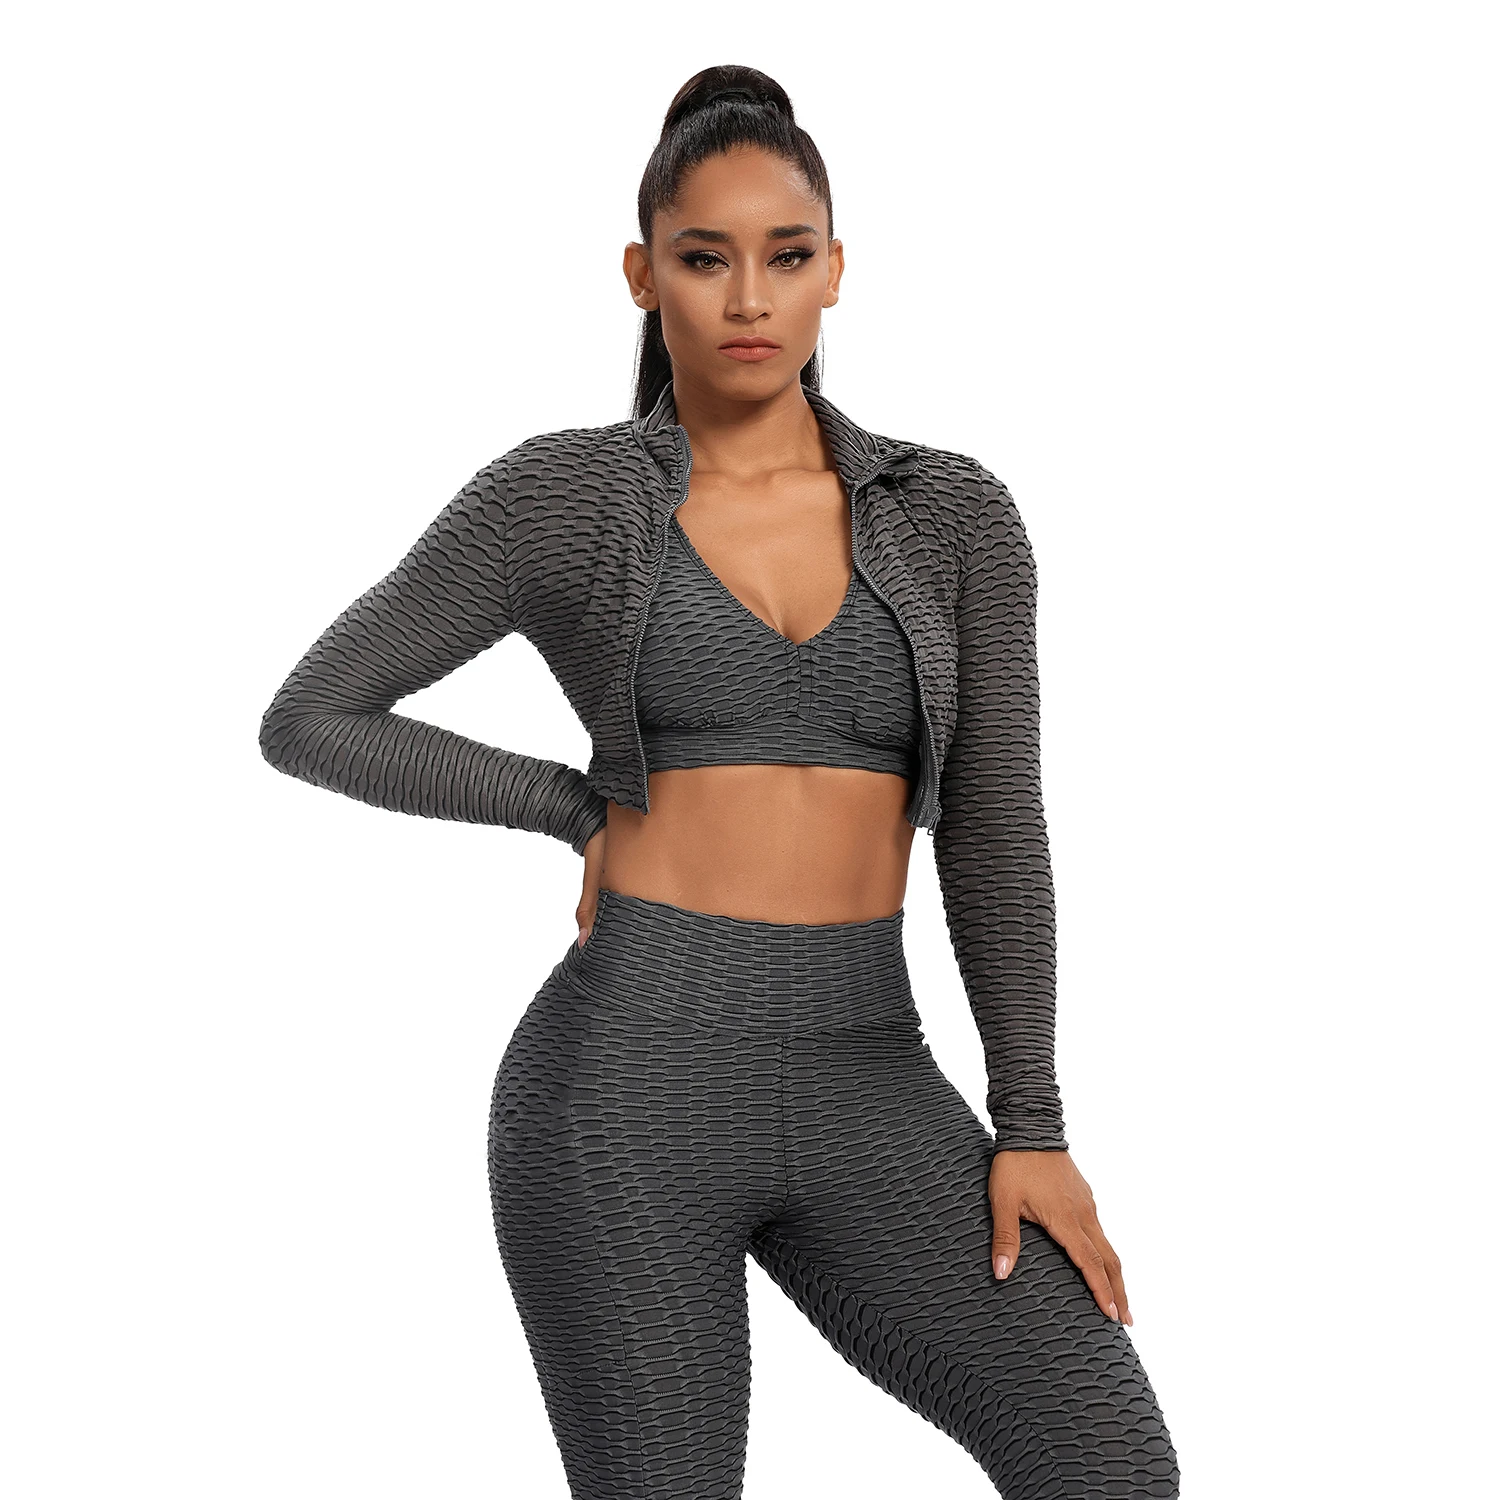 NEW Print Women Yoga Sets fitness sportswear Gym Clothing Track Suit High Waist gym leggings sexy sports suits 2021 yoga tops